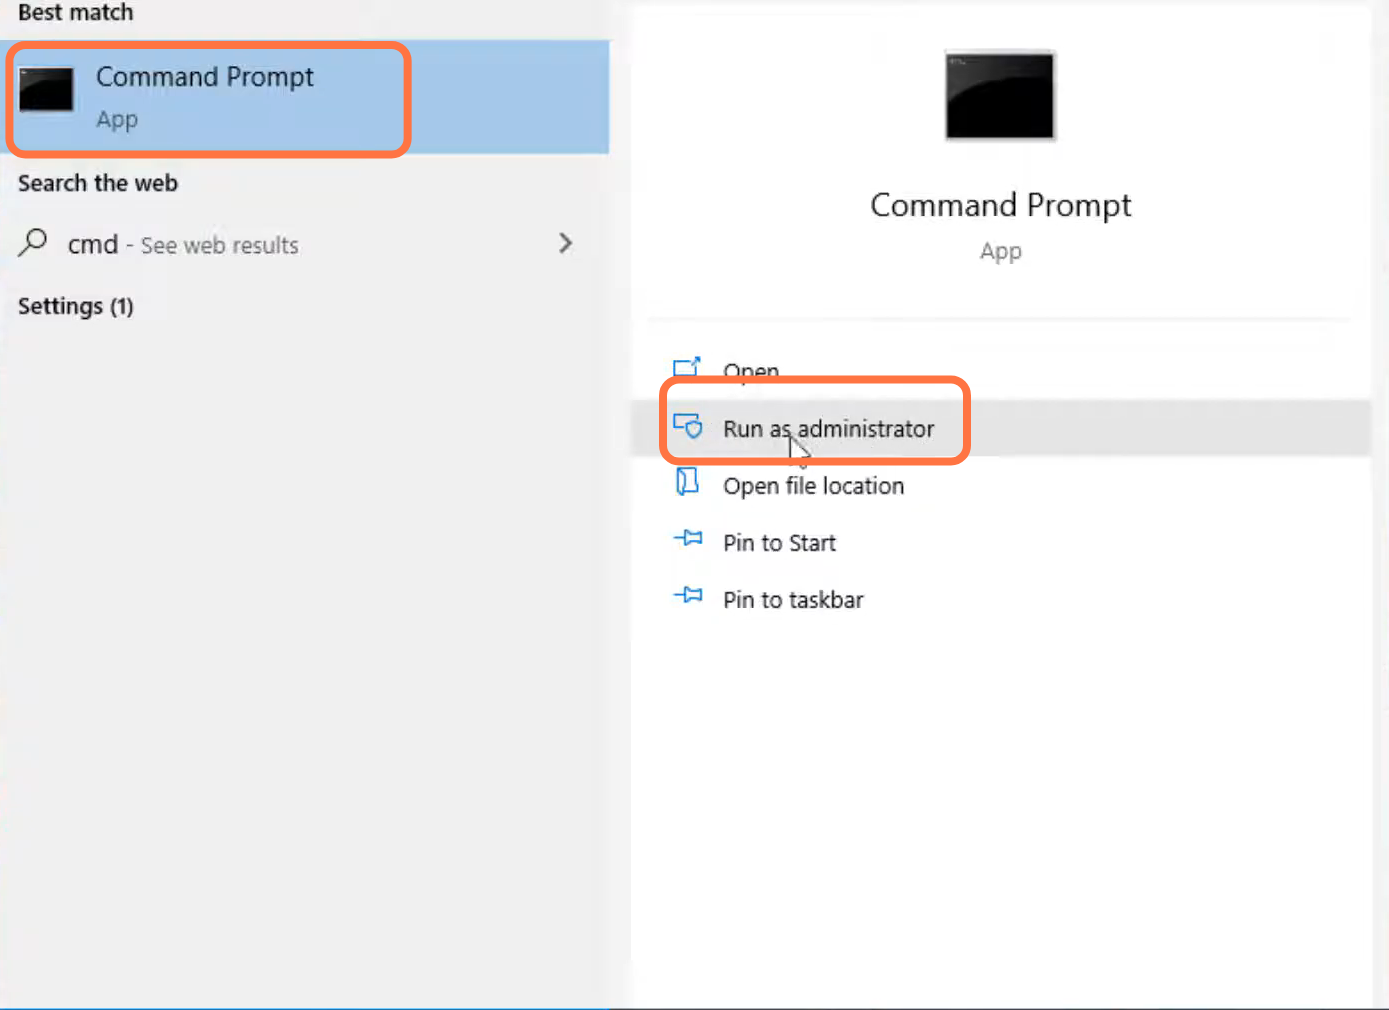 You will need to search for command prompt and tap on Run as administrator.